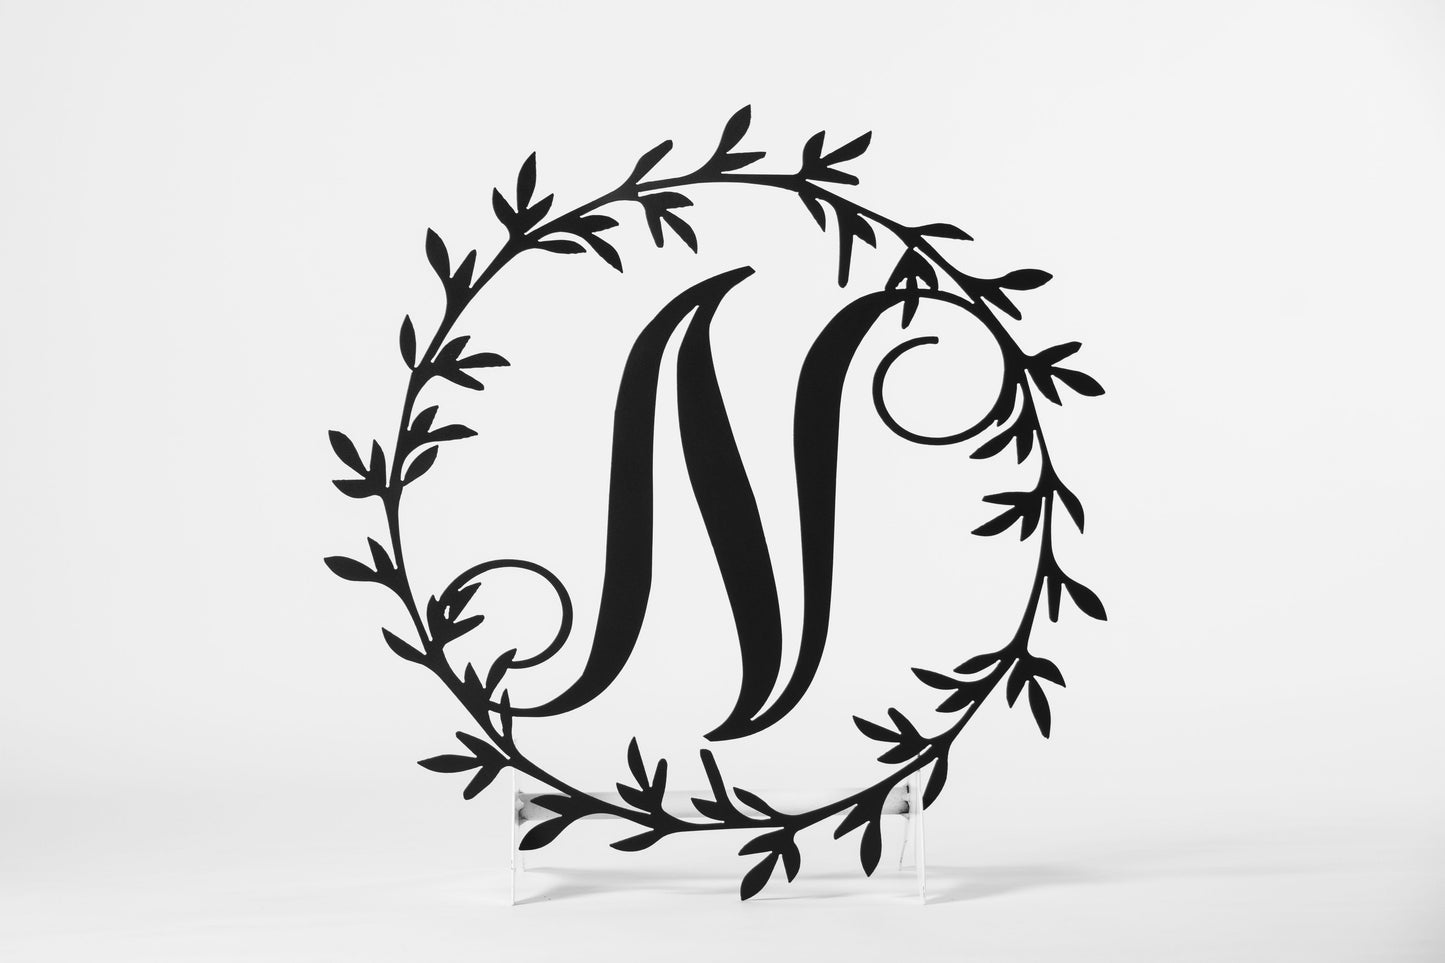 Personalized Metal Letter Wreath